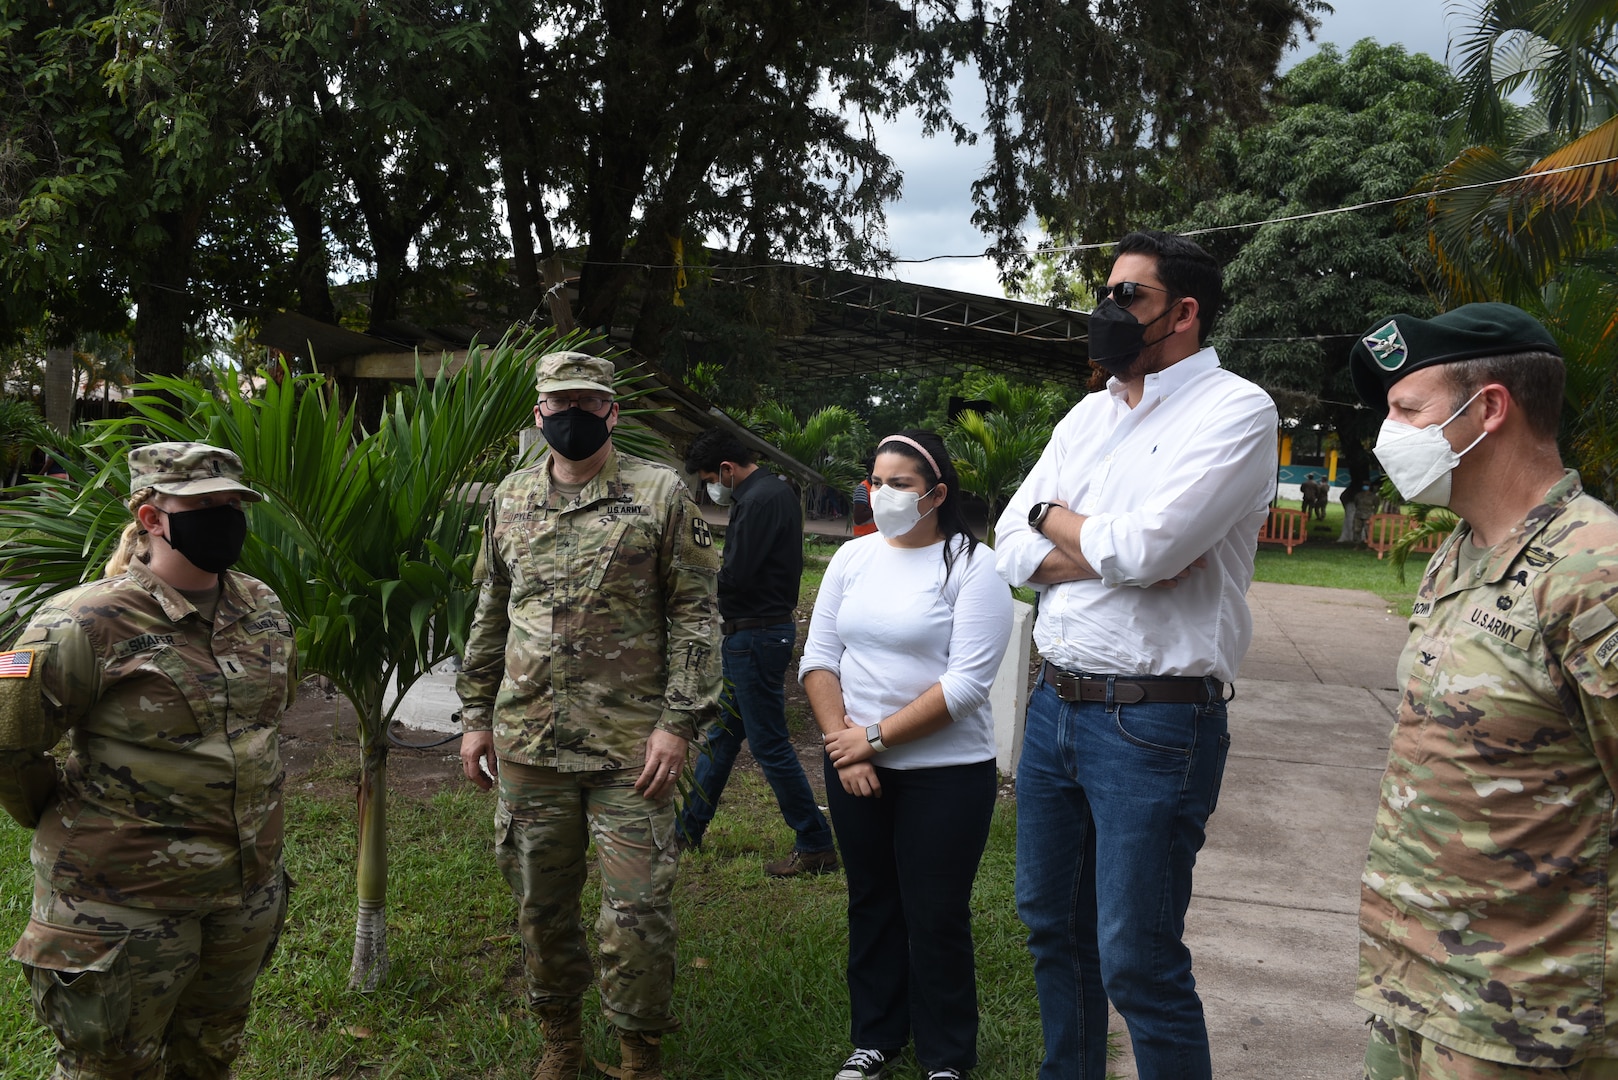 Joint Task Force Bravo conducted a medical engagement in Olancho, Honduras to provide humanitarian assistance and medical services at the request of the government of Honduras.